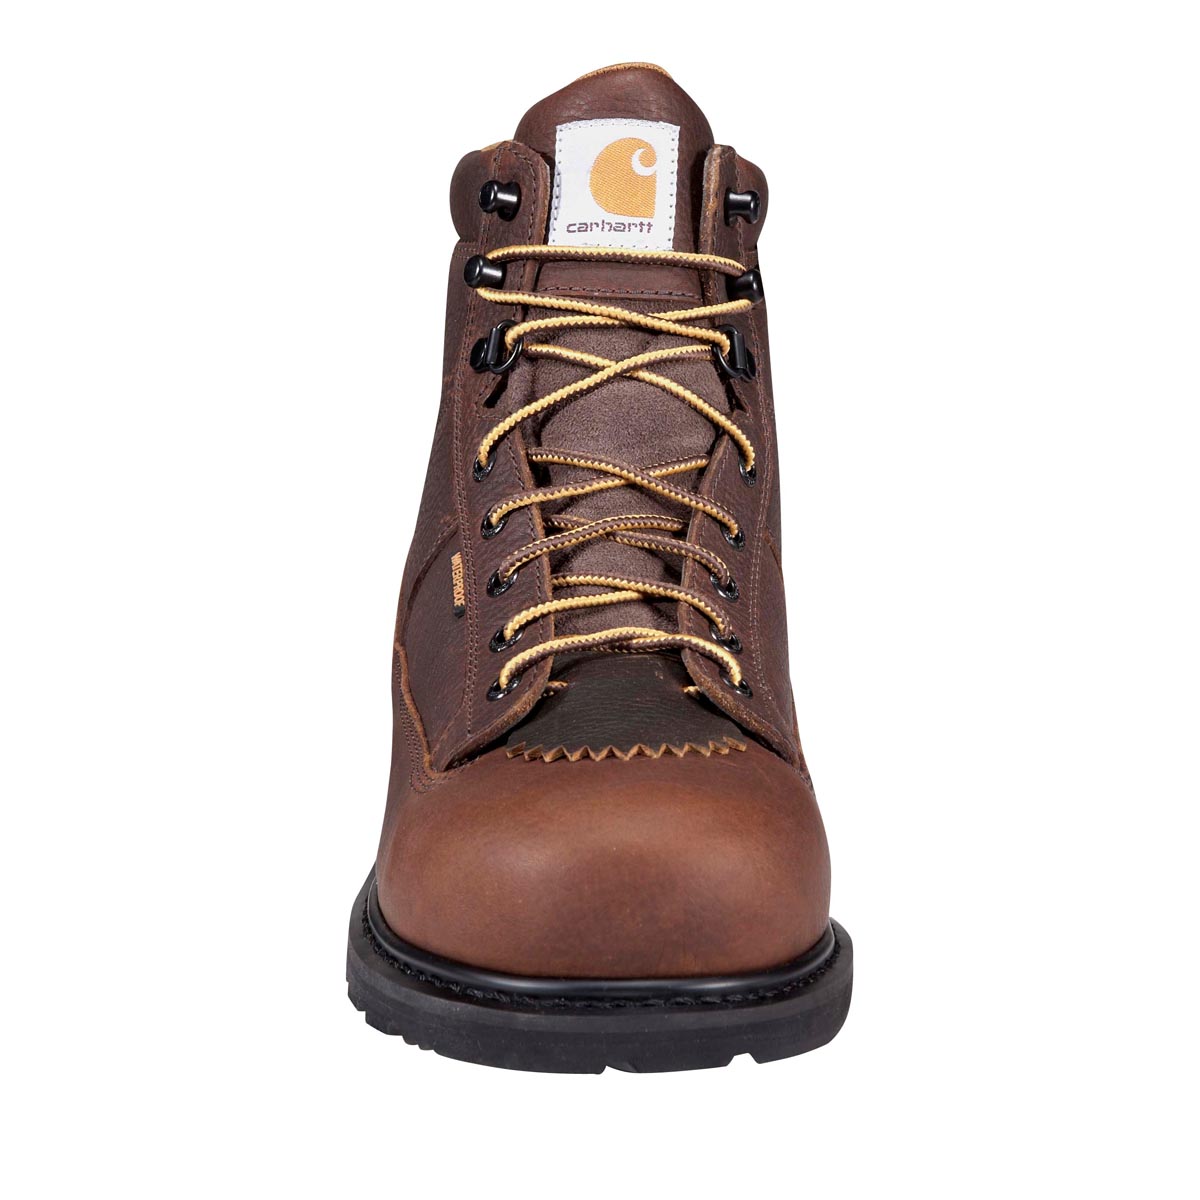 Carhartt Mens 6 Inch Brown Waterproof Work Boot Non Safety Toe